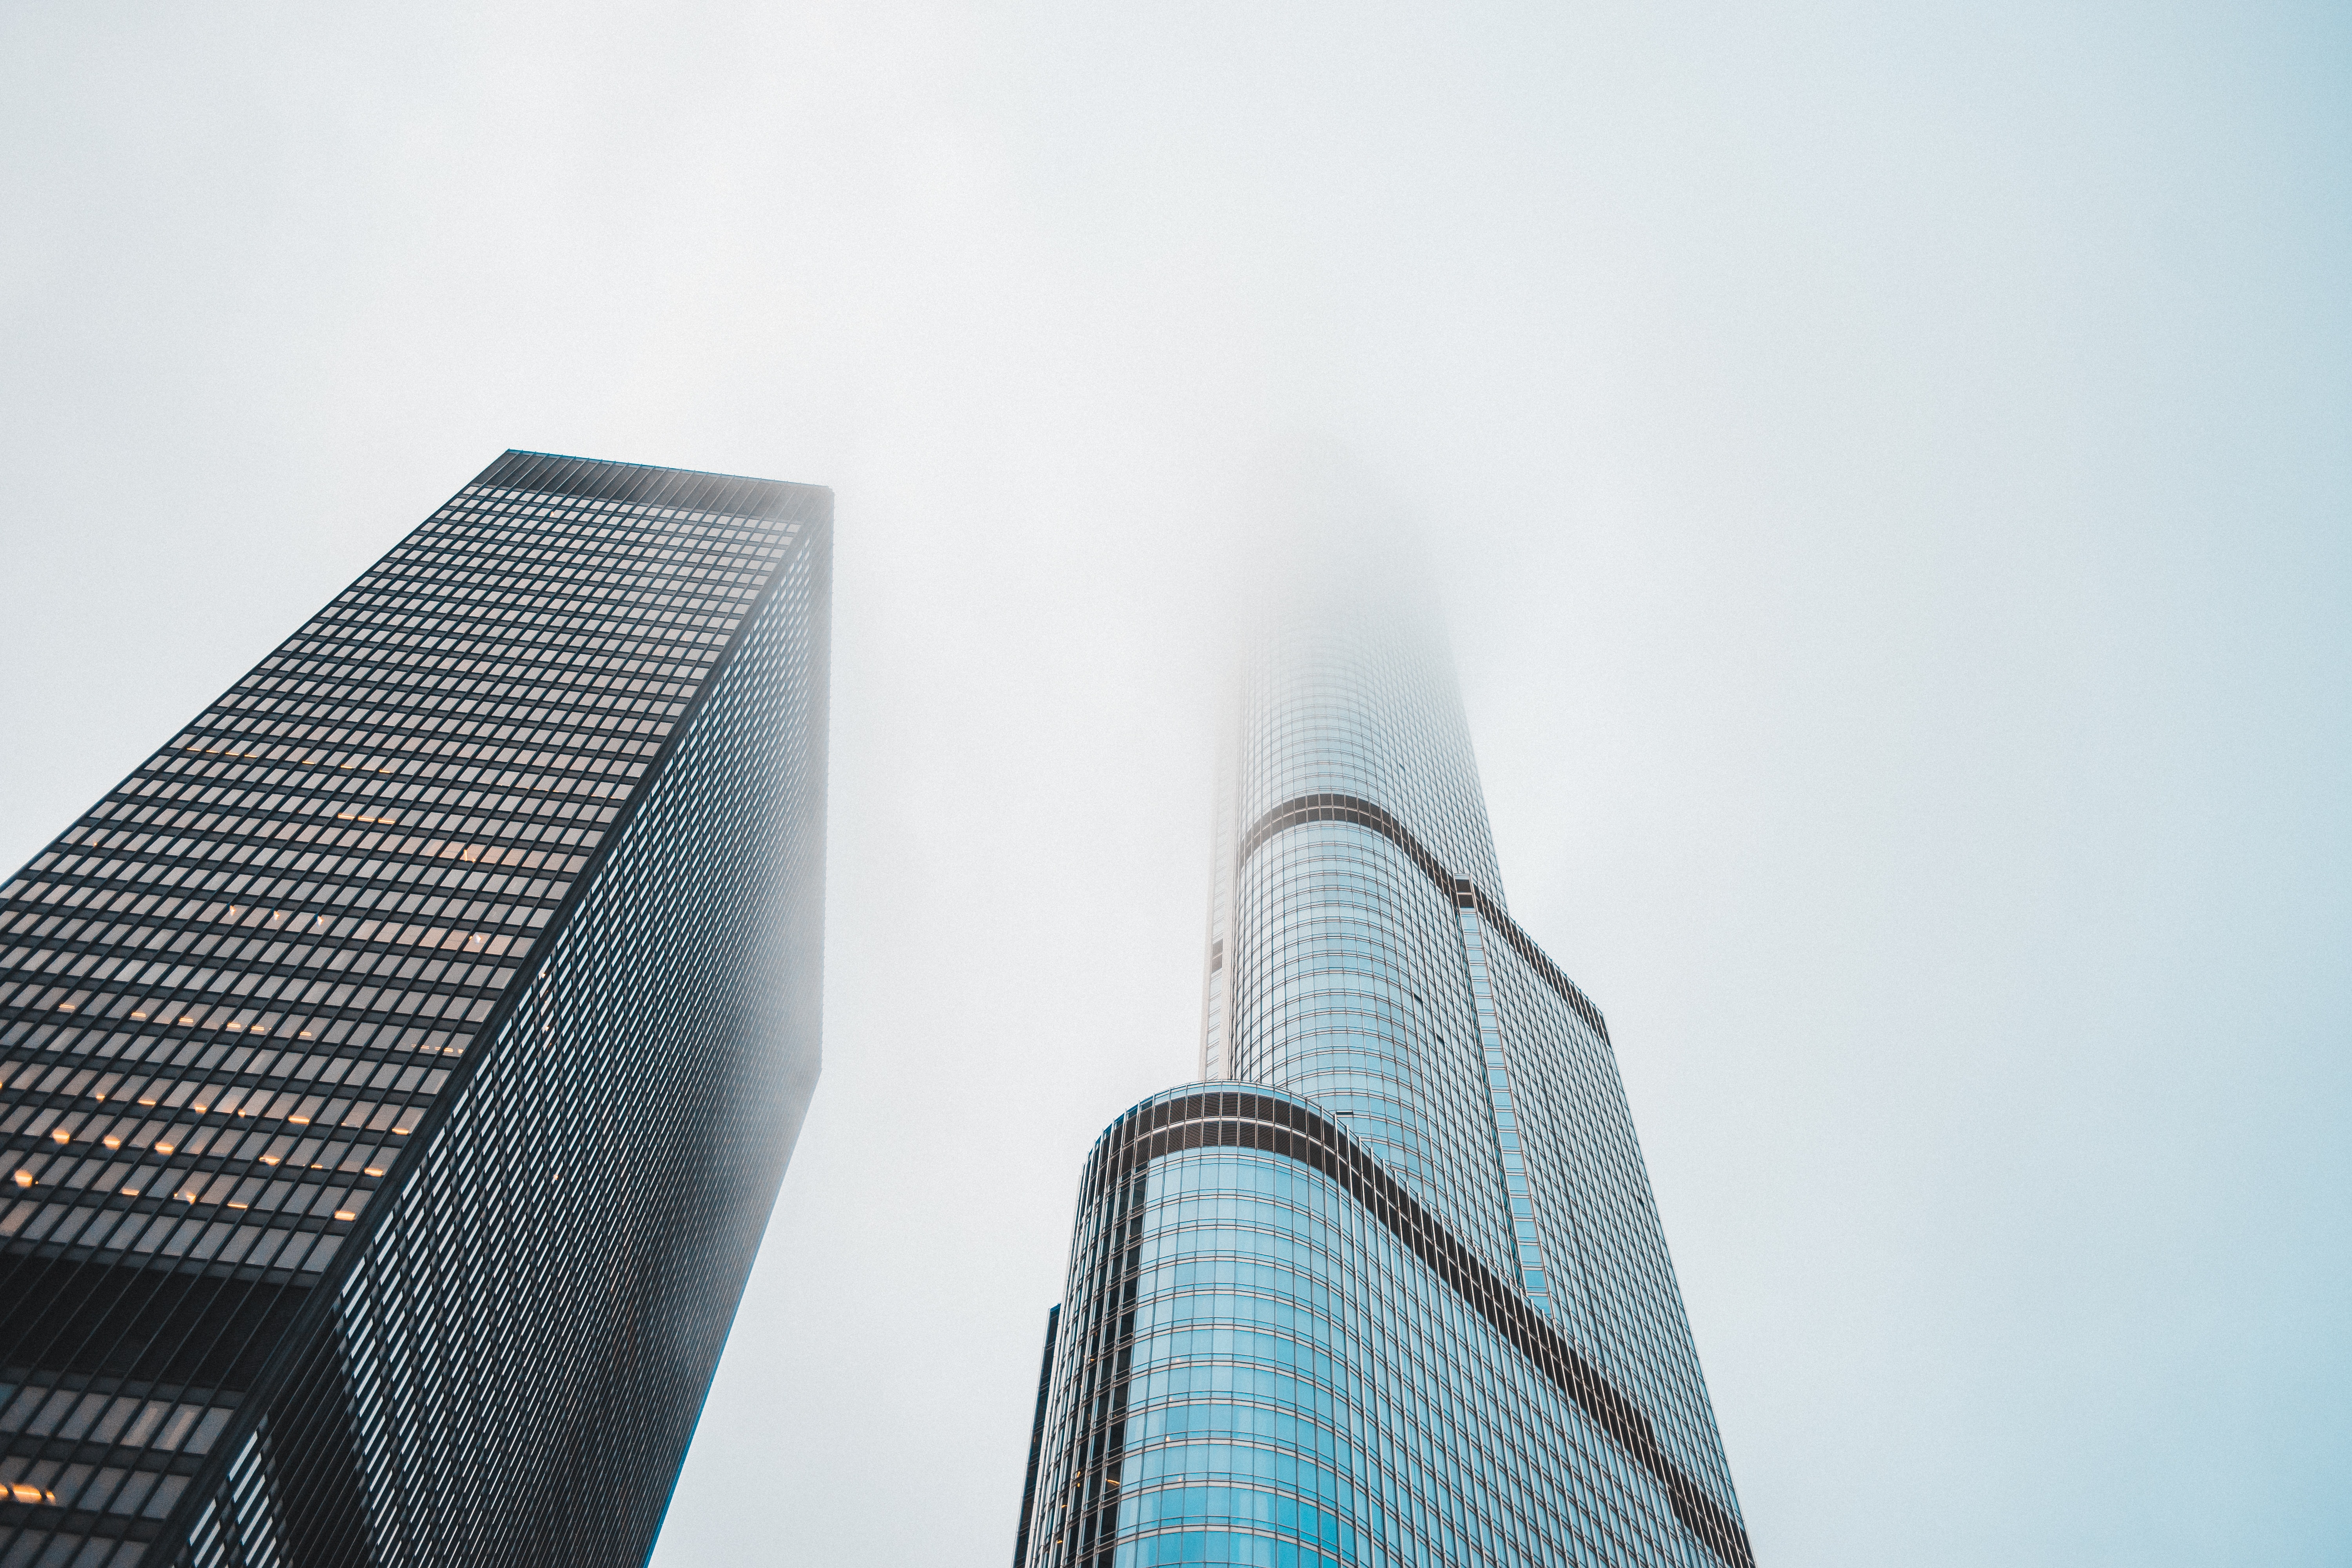 Worm's eye view of two skyscrapers under the fog